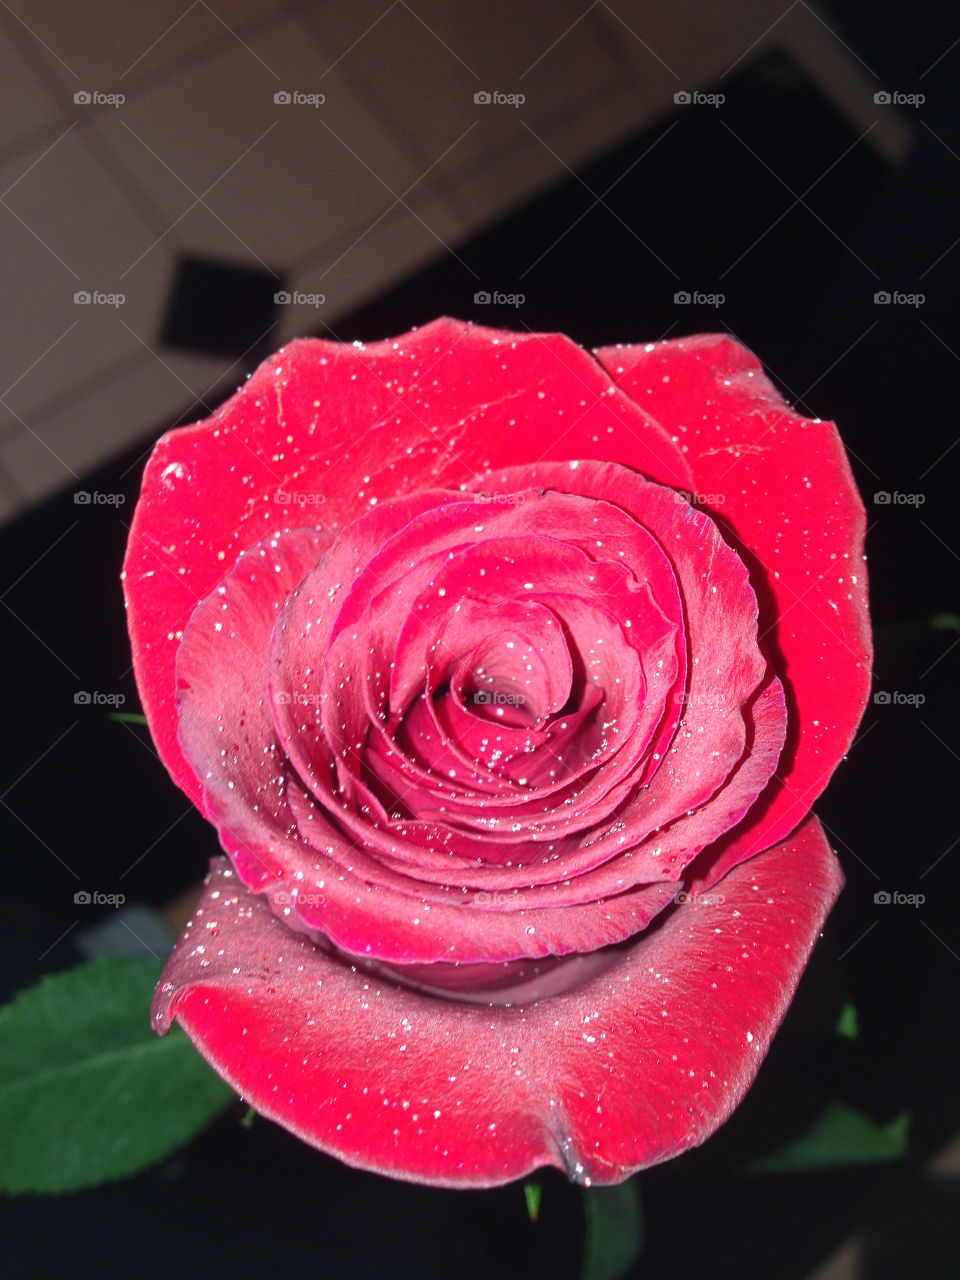 Beautiful Rose given to me with water droplets from the light drizzled